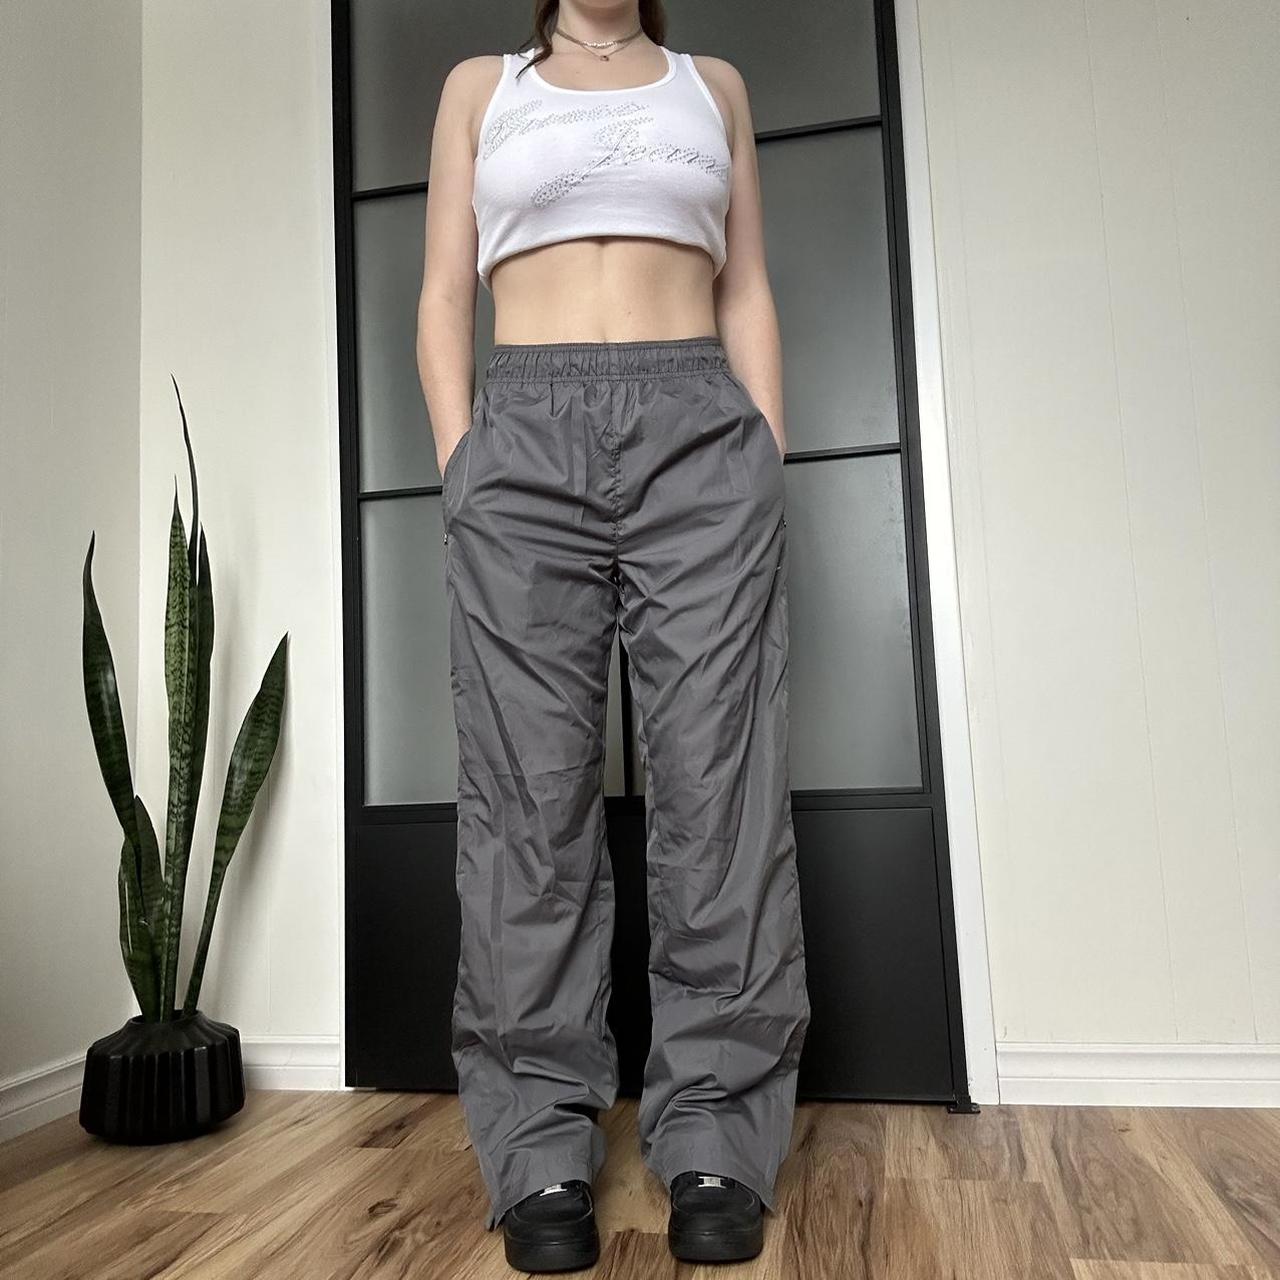 🏔y2k Grey Baggy Hiking Pants with Pockets🏔 Brand:... - Depop